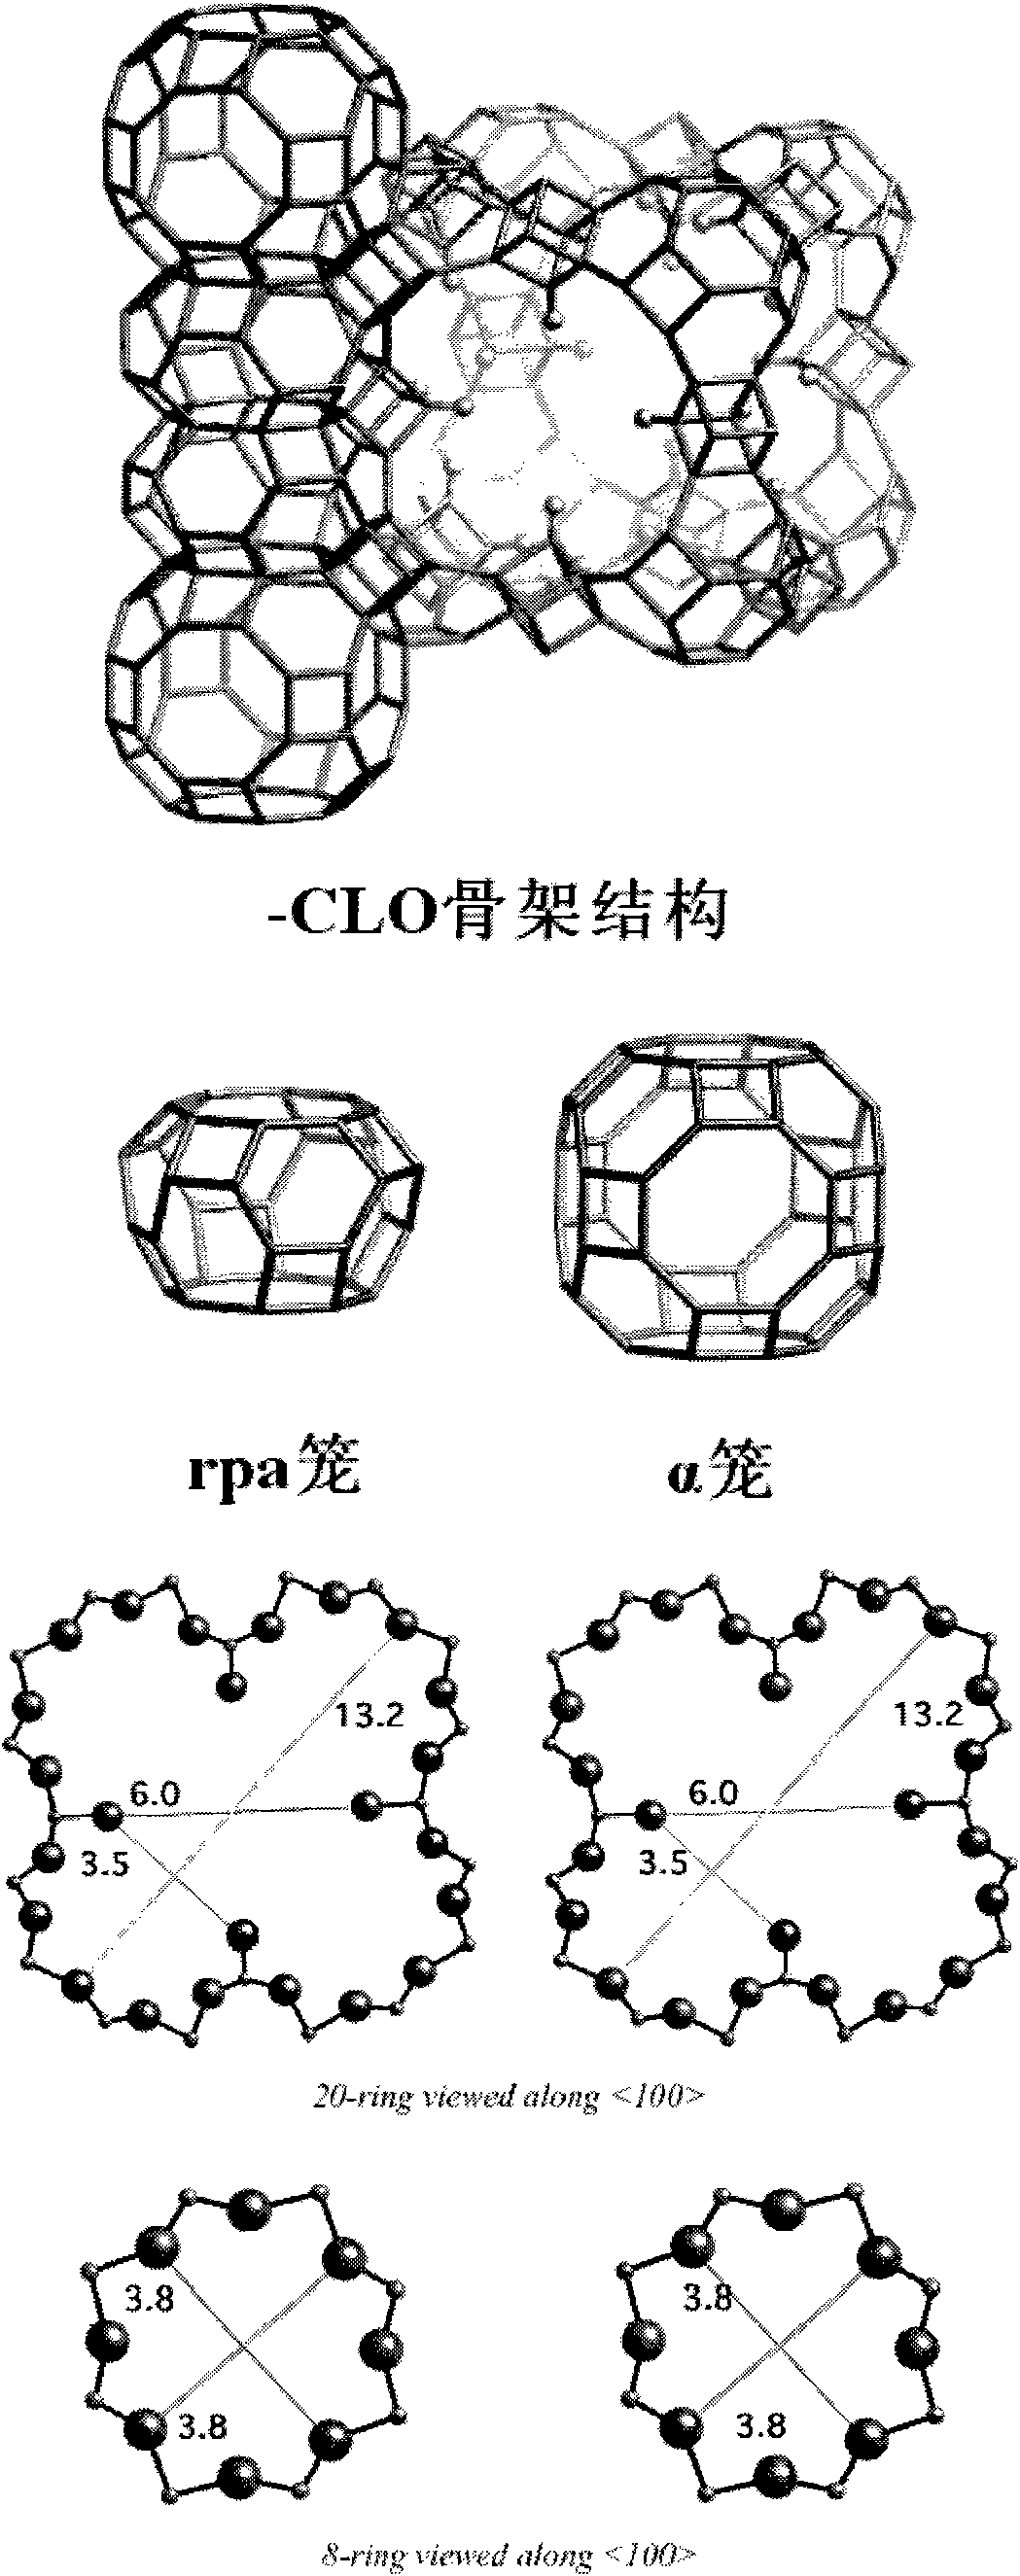 -CLO structural aluminum phosphate molecular sieve and preparation method thereof